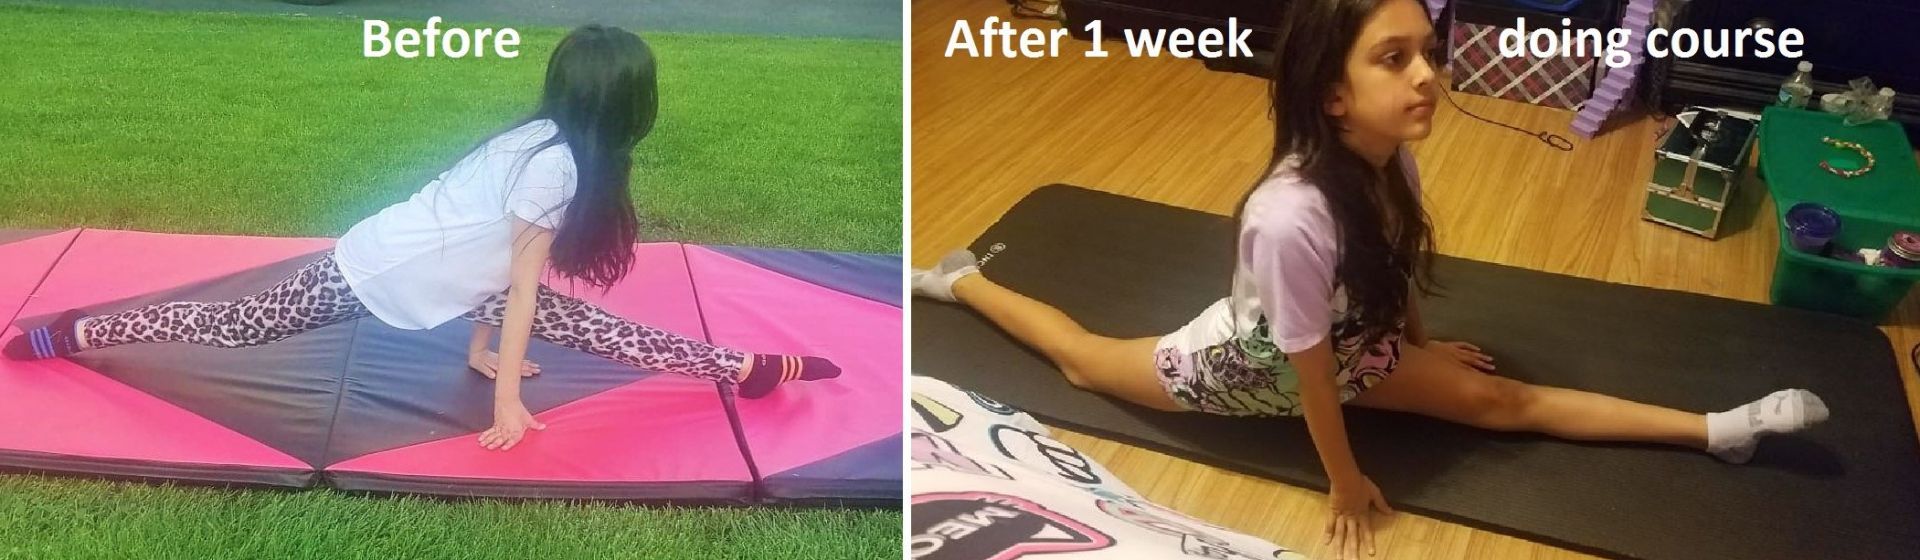 Before and after showing can do full splits after . Before photo she was far away from splits